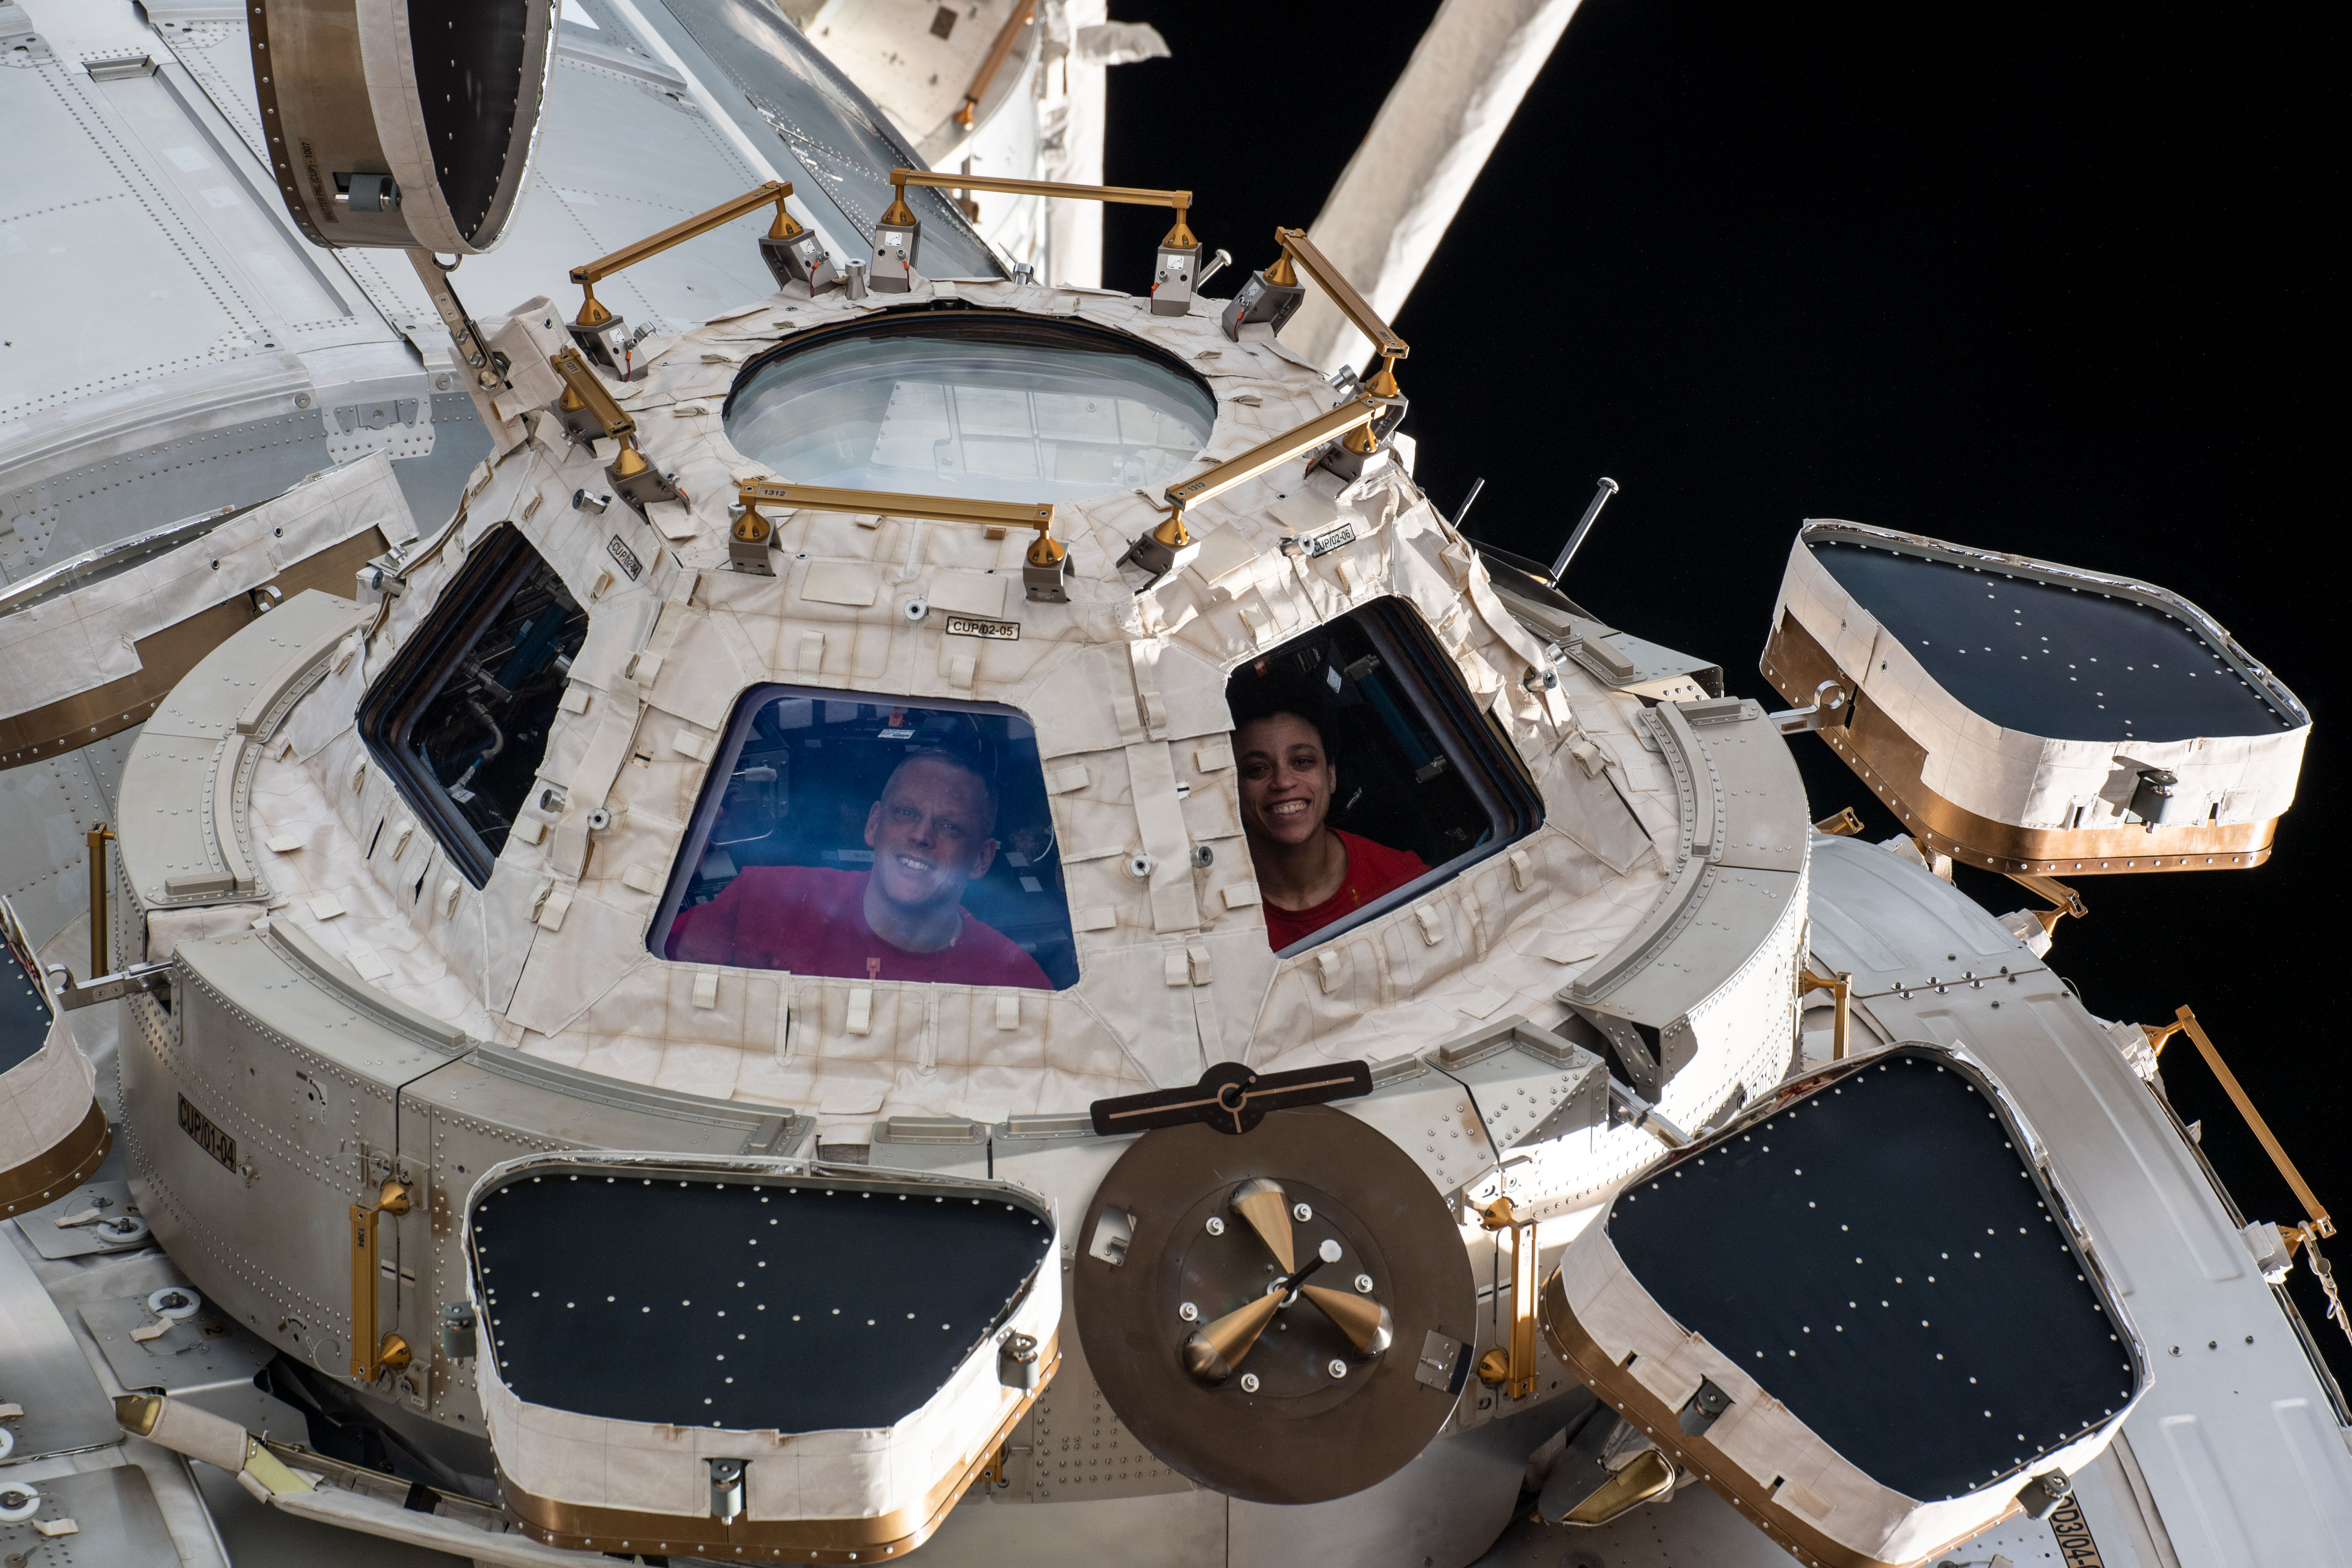 NASA astronauts Bob Hines and Jessica Watkins look out from a window on the space station’s cupola